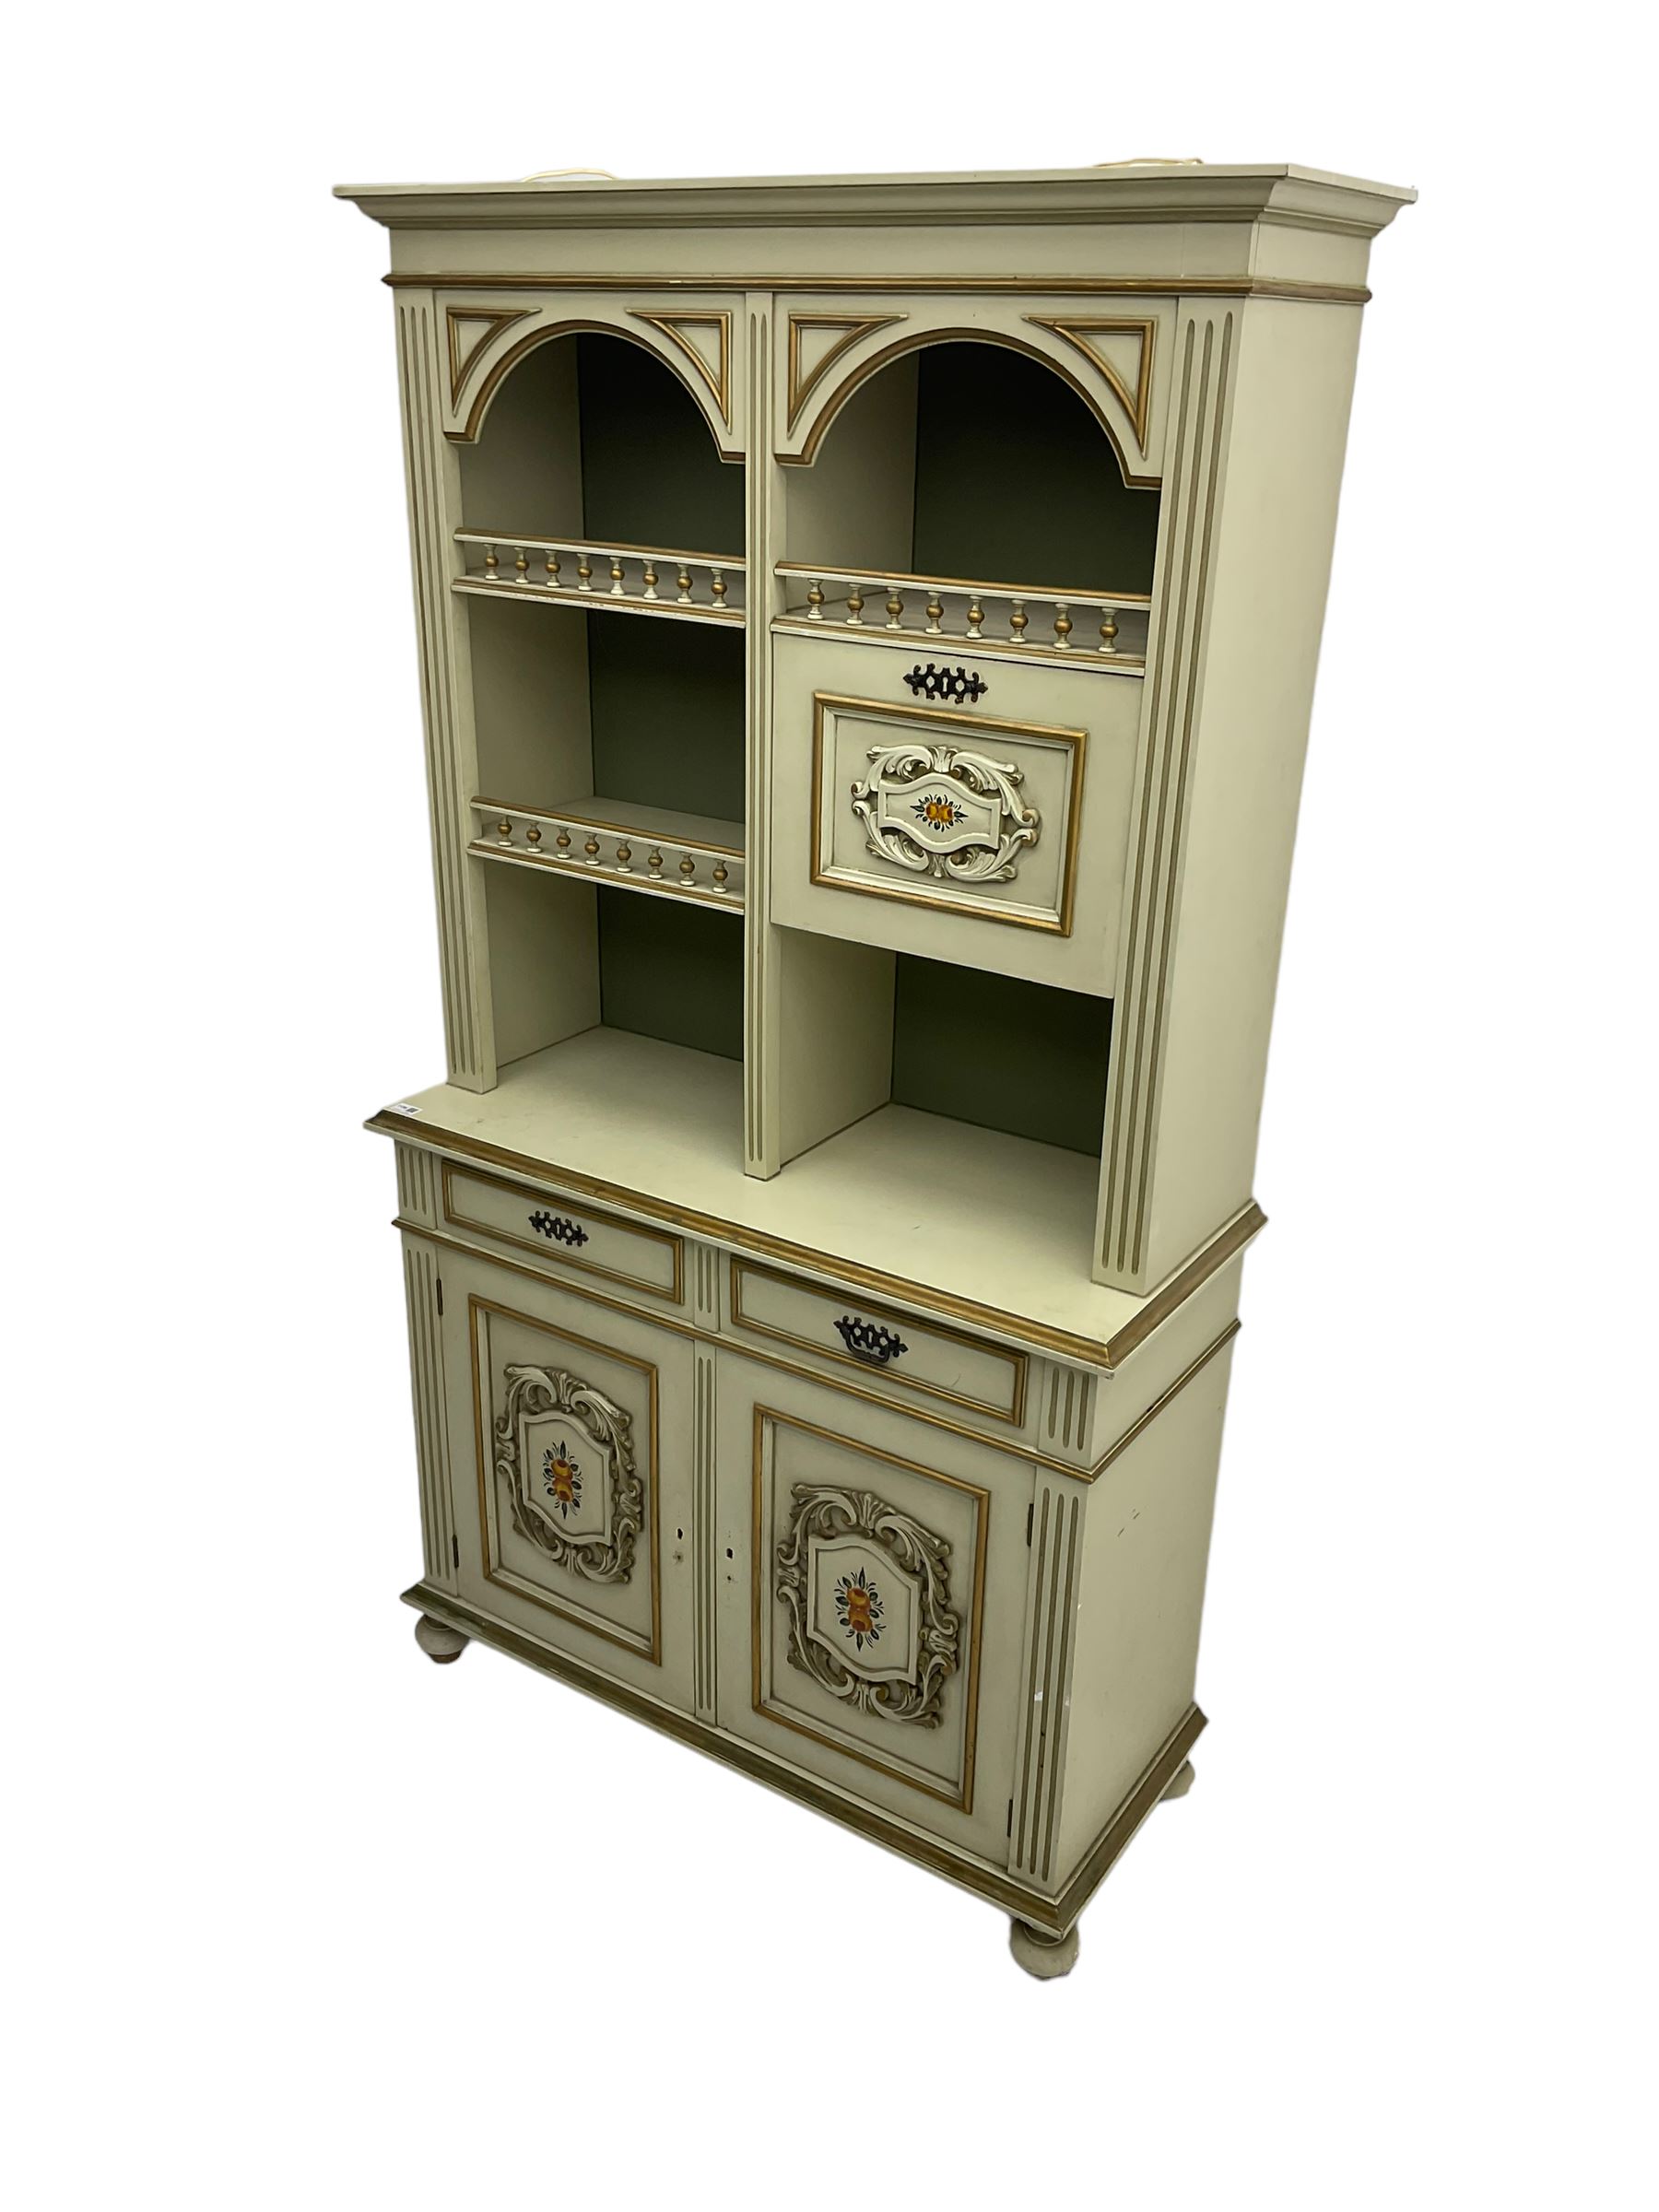 Portuguese painted dresser - Image 6 of 6